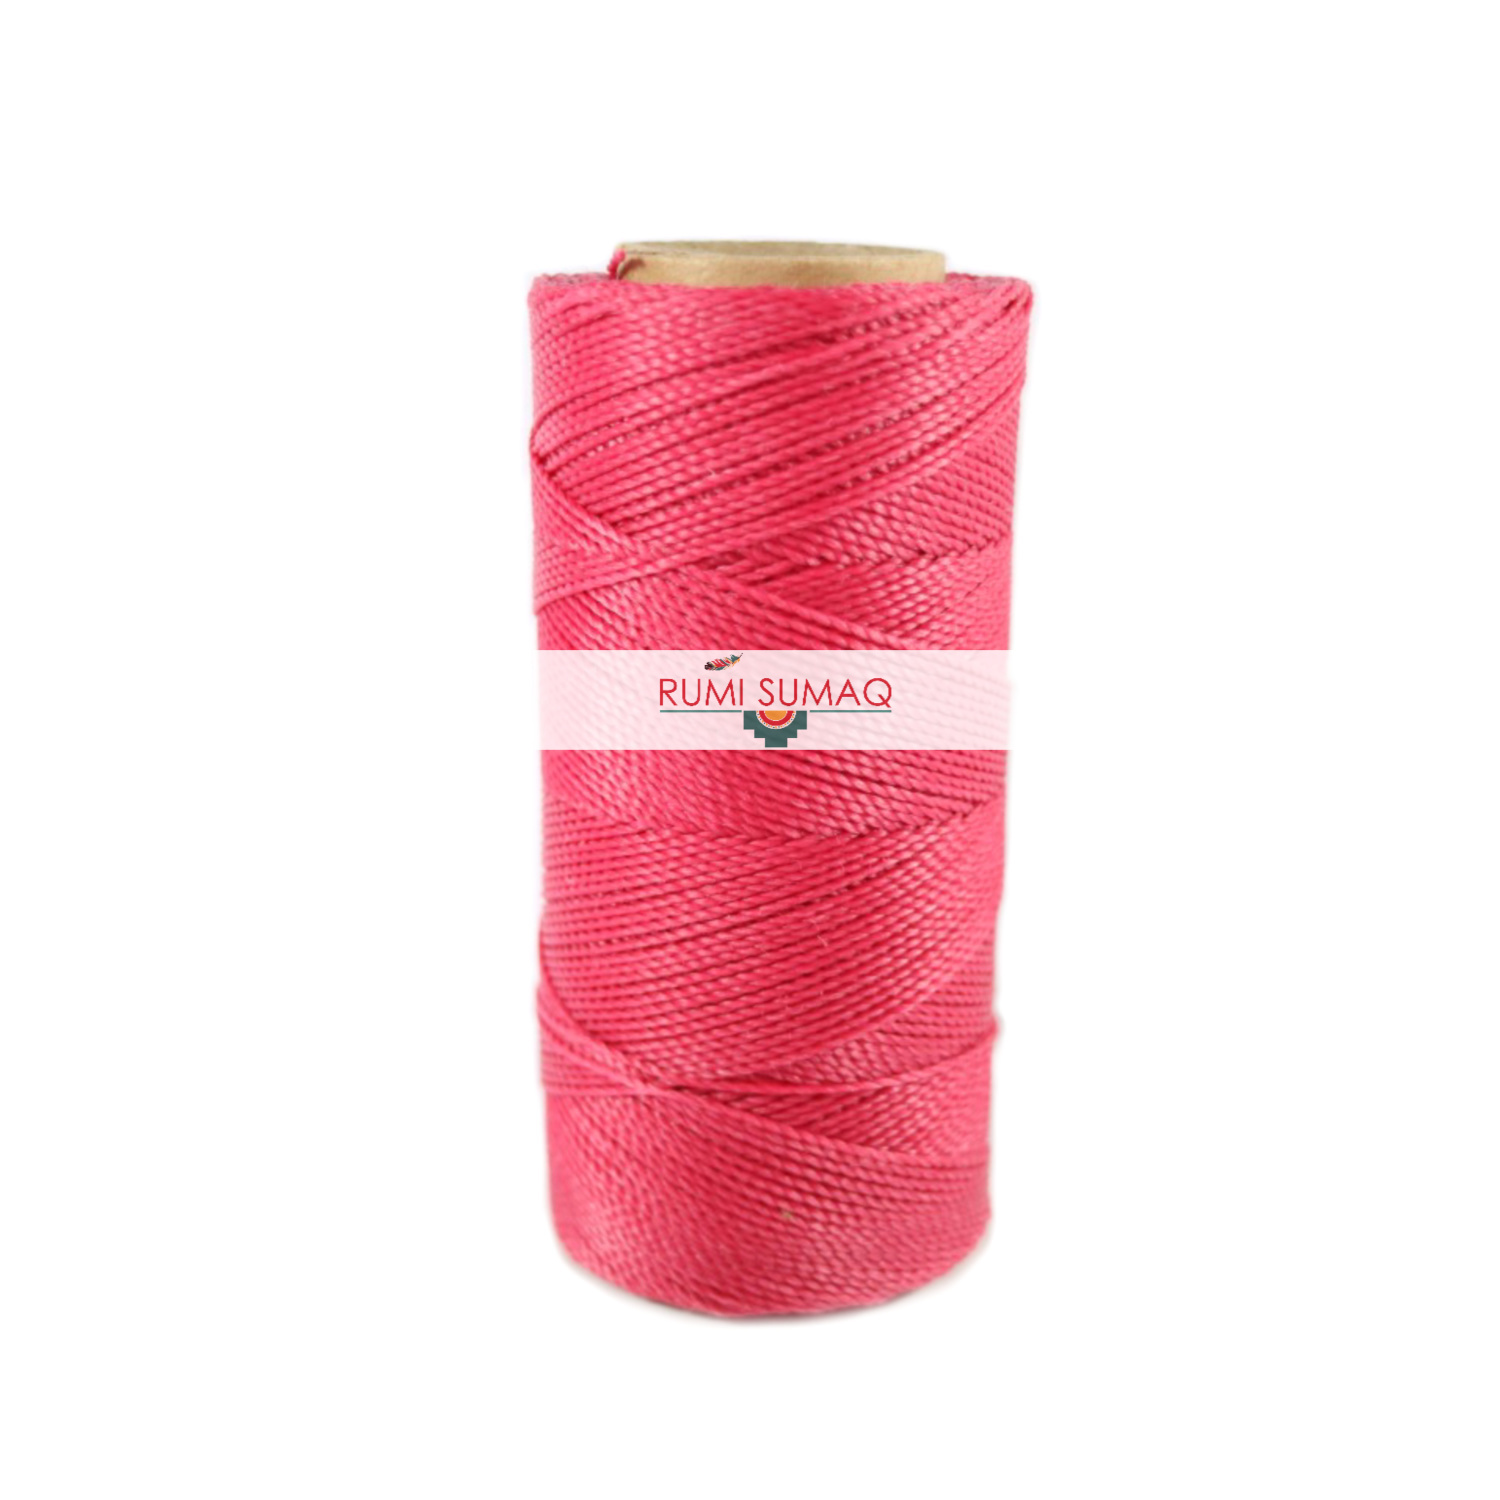 Find Linhasita 545 hot pinkl 1mm waxed polyester cord at RUMI SUMAQ, the premier retailer for waxed cords for basketry, jewelry making, beading, quilting